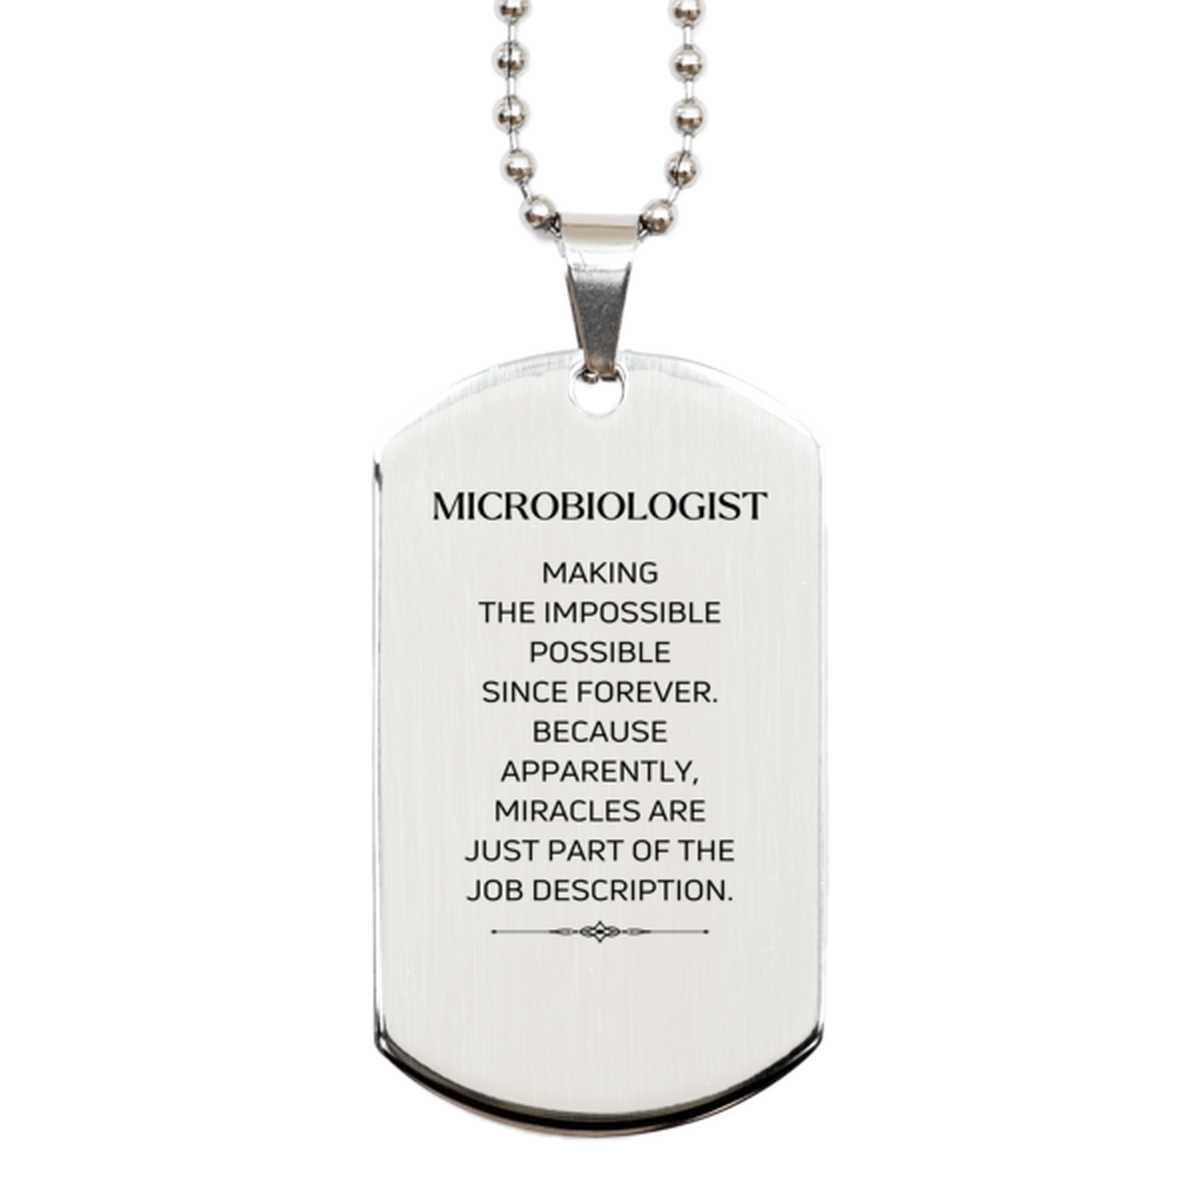 Funny Microbiologist Gifts, Miracles are just part of the job description, Inspirational Birthday Silver Dog Tag For Microbiologist, Men, Women, Coworkers, Friends, Boss